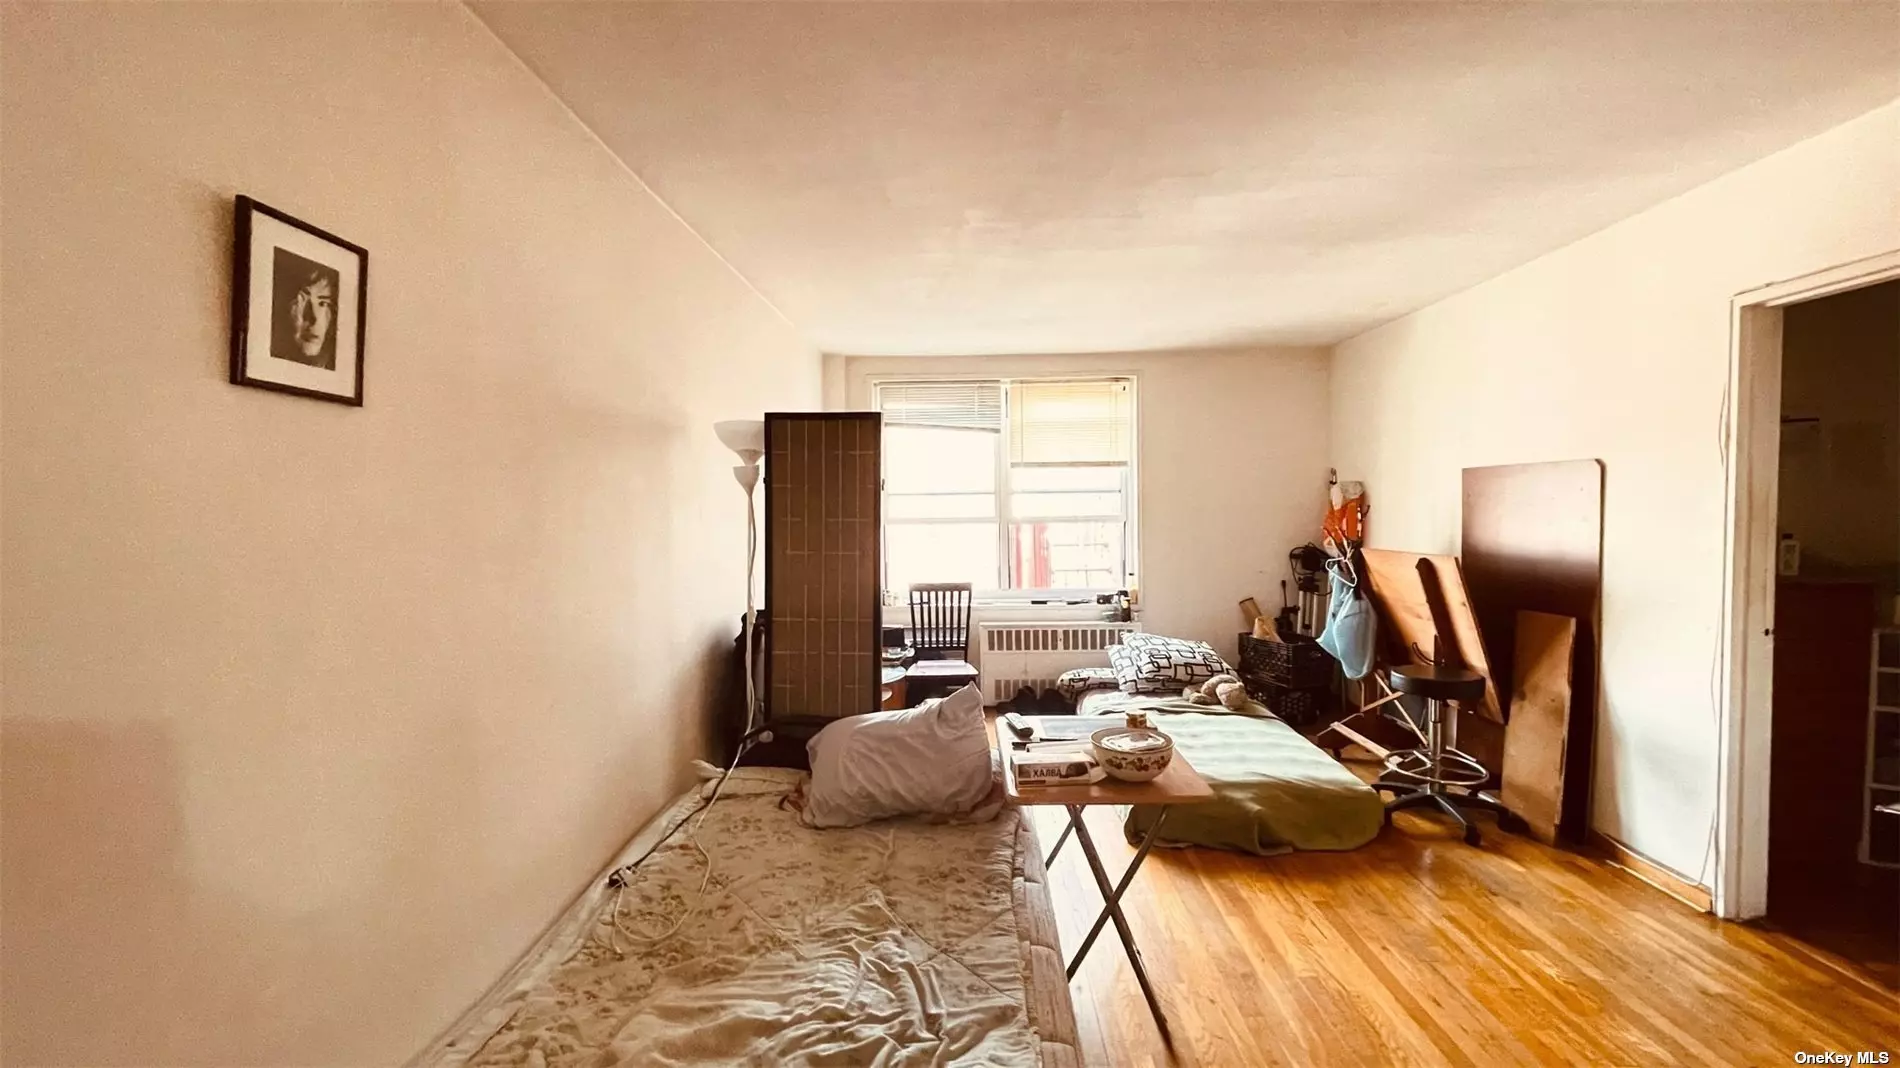 Location & Convenience!! Spacious and Well-Maintained Studio in the Heart of Flushing. Live-in Super, 16 Hours Doorman, . Oak Hardwood Floor Throughout. This is A Bright Co-op. One Block to 7 train subway & Bus Lines, LIRR and Buses. As Well As Malls, Shops, Restaurants, and More.. !!